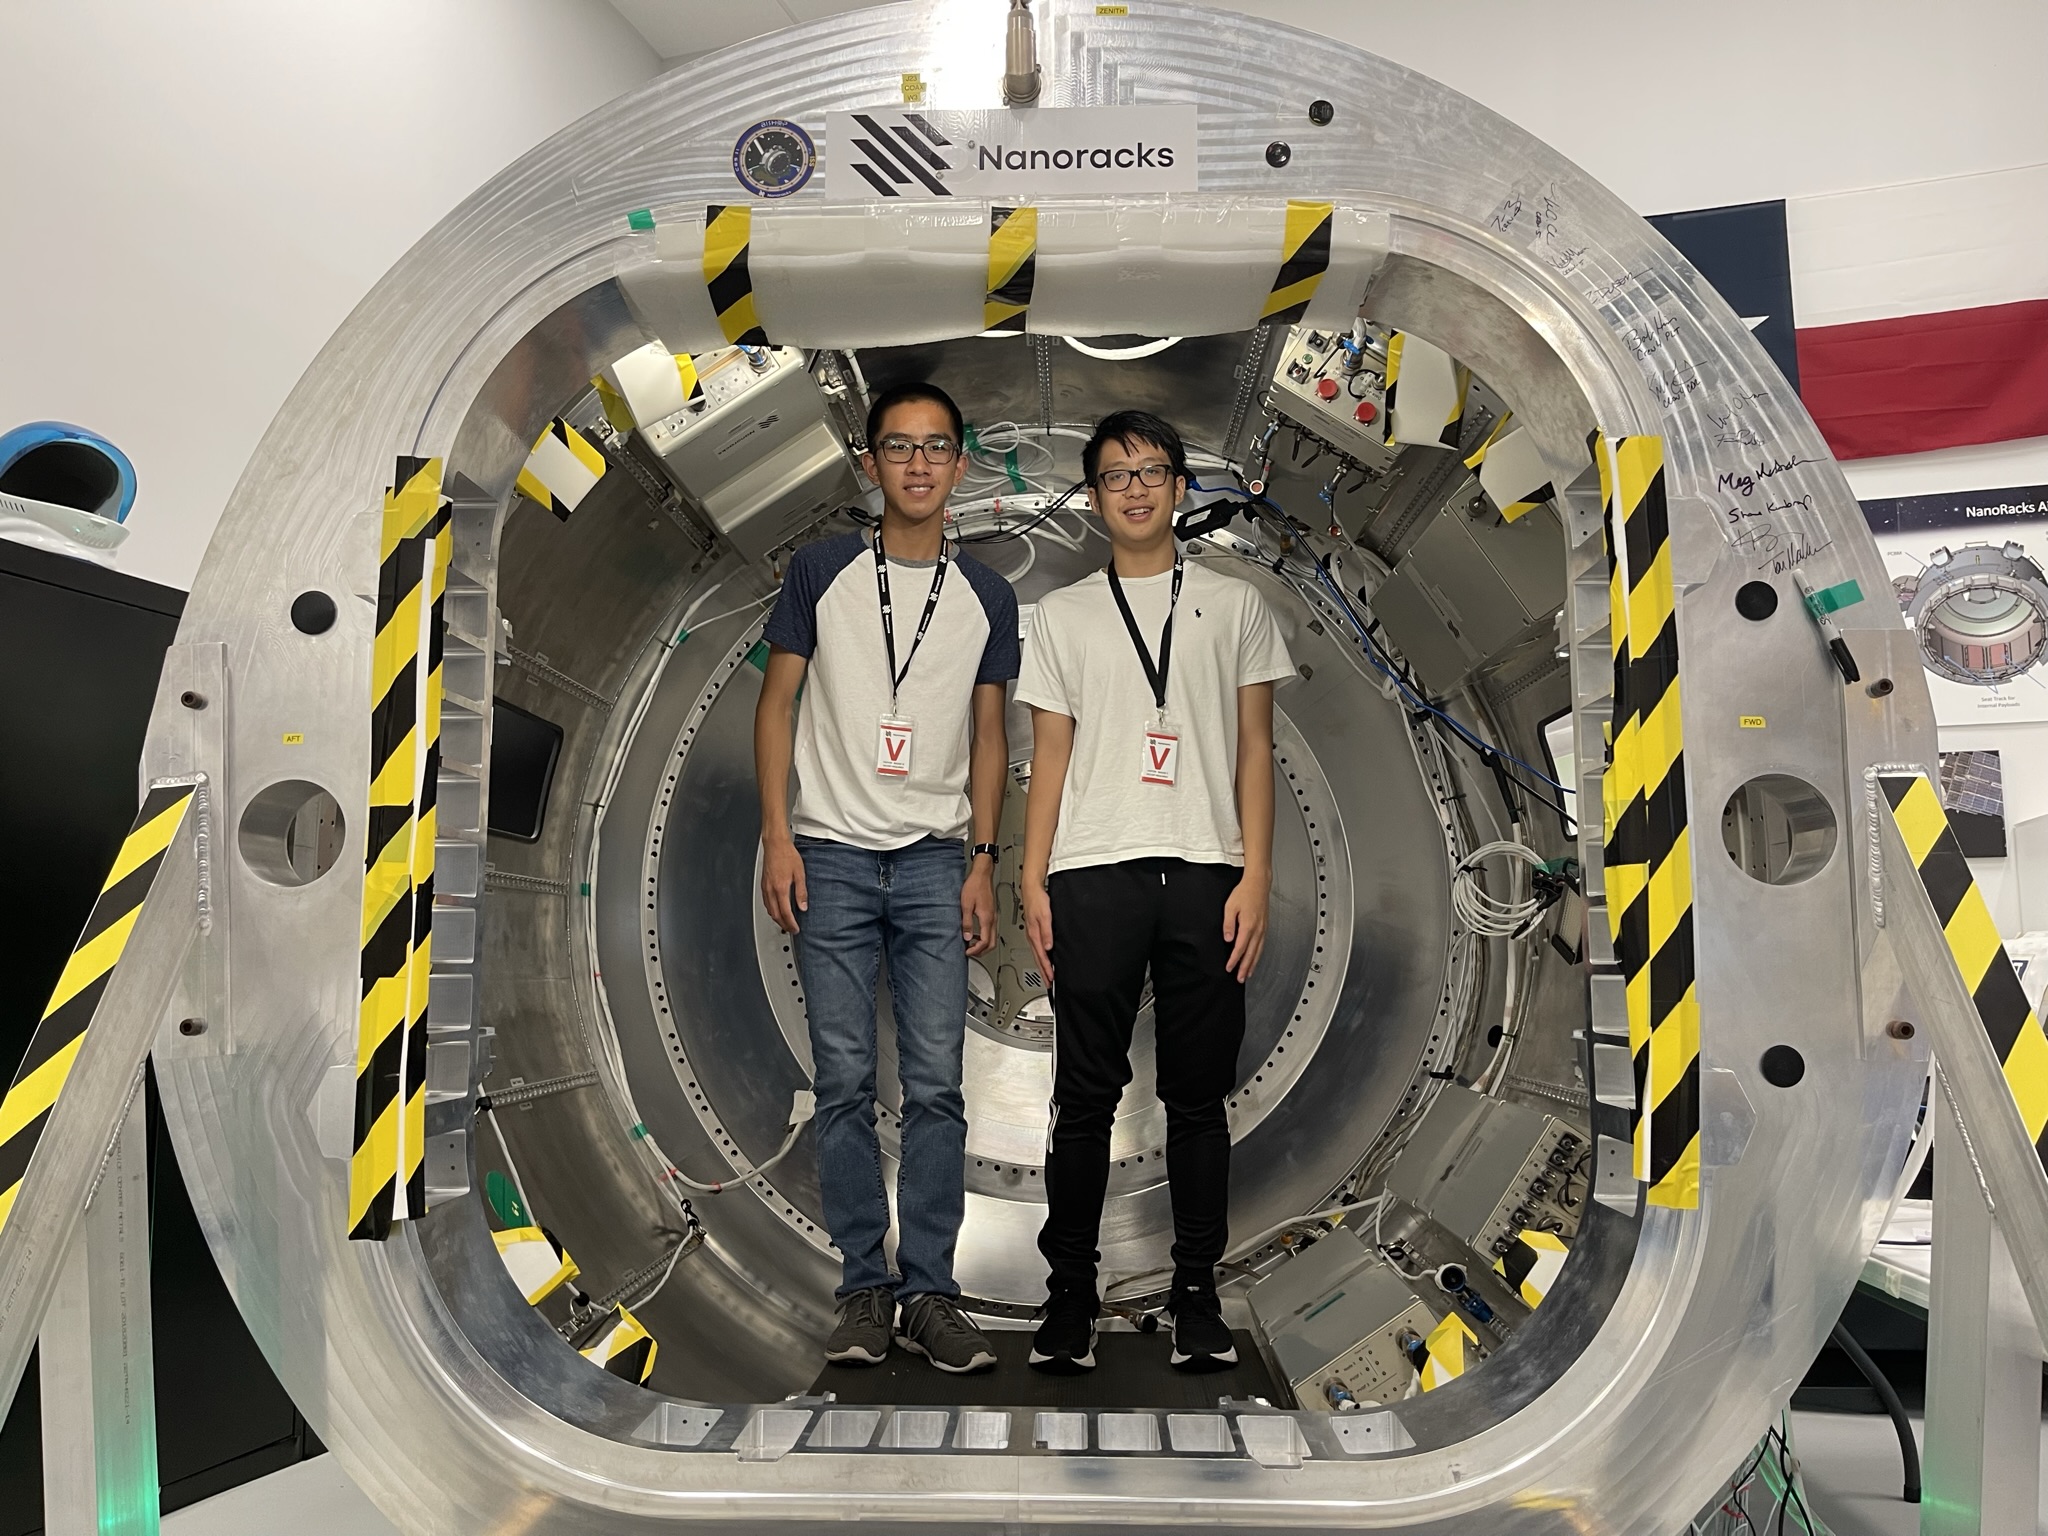 Alan Hsu and Khoi Dinh at Nanoracks near the Johnson Space Center in Houston to deliver TJ REVERB